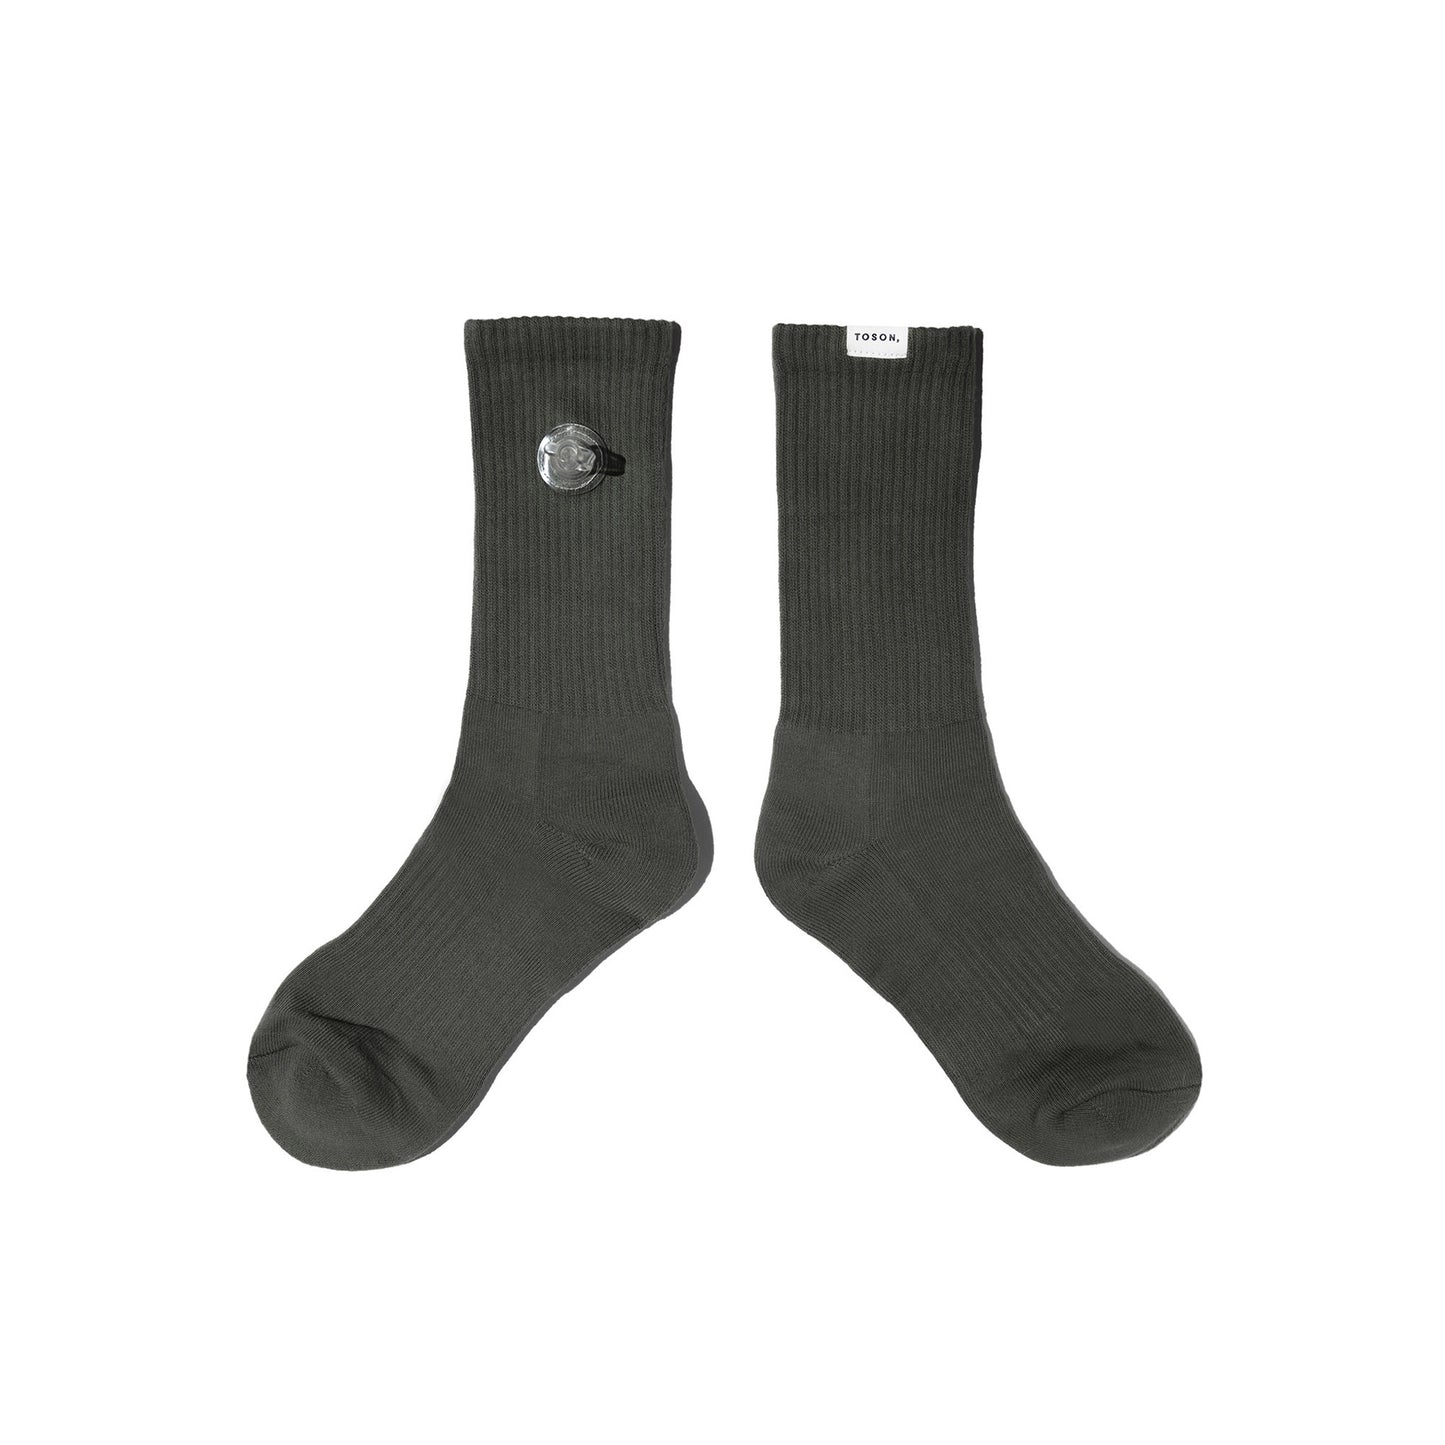 Toson, Inflatable Socks 2 Pack in Army Green + Royal Blue